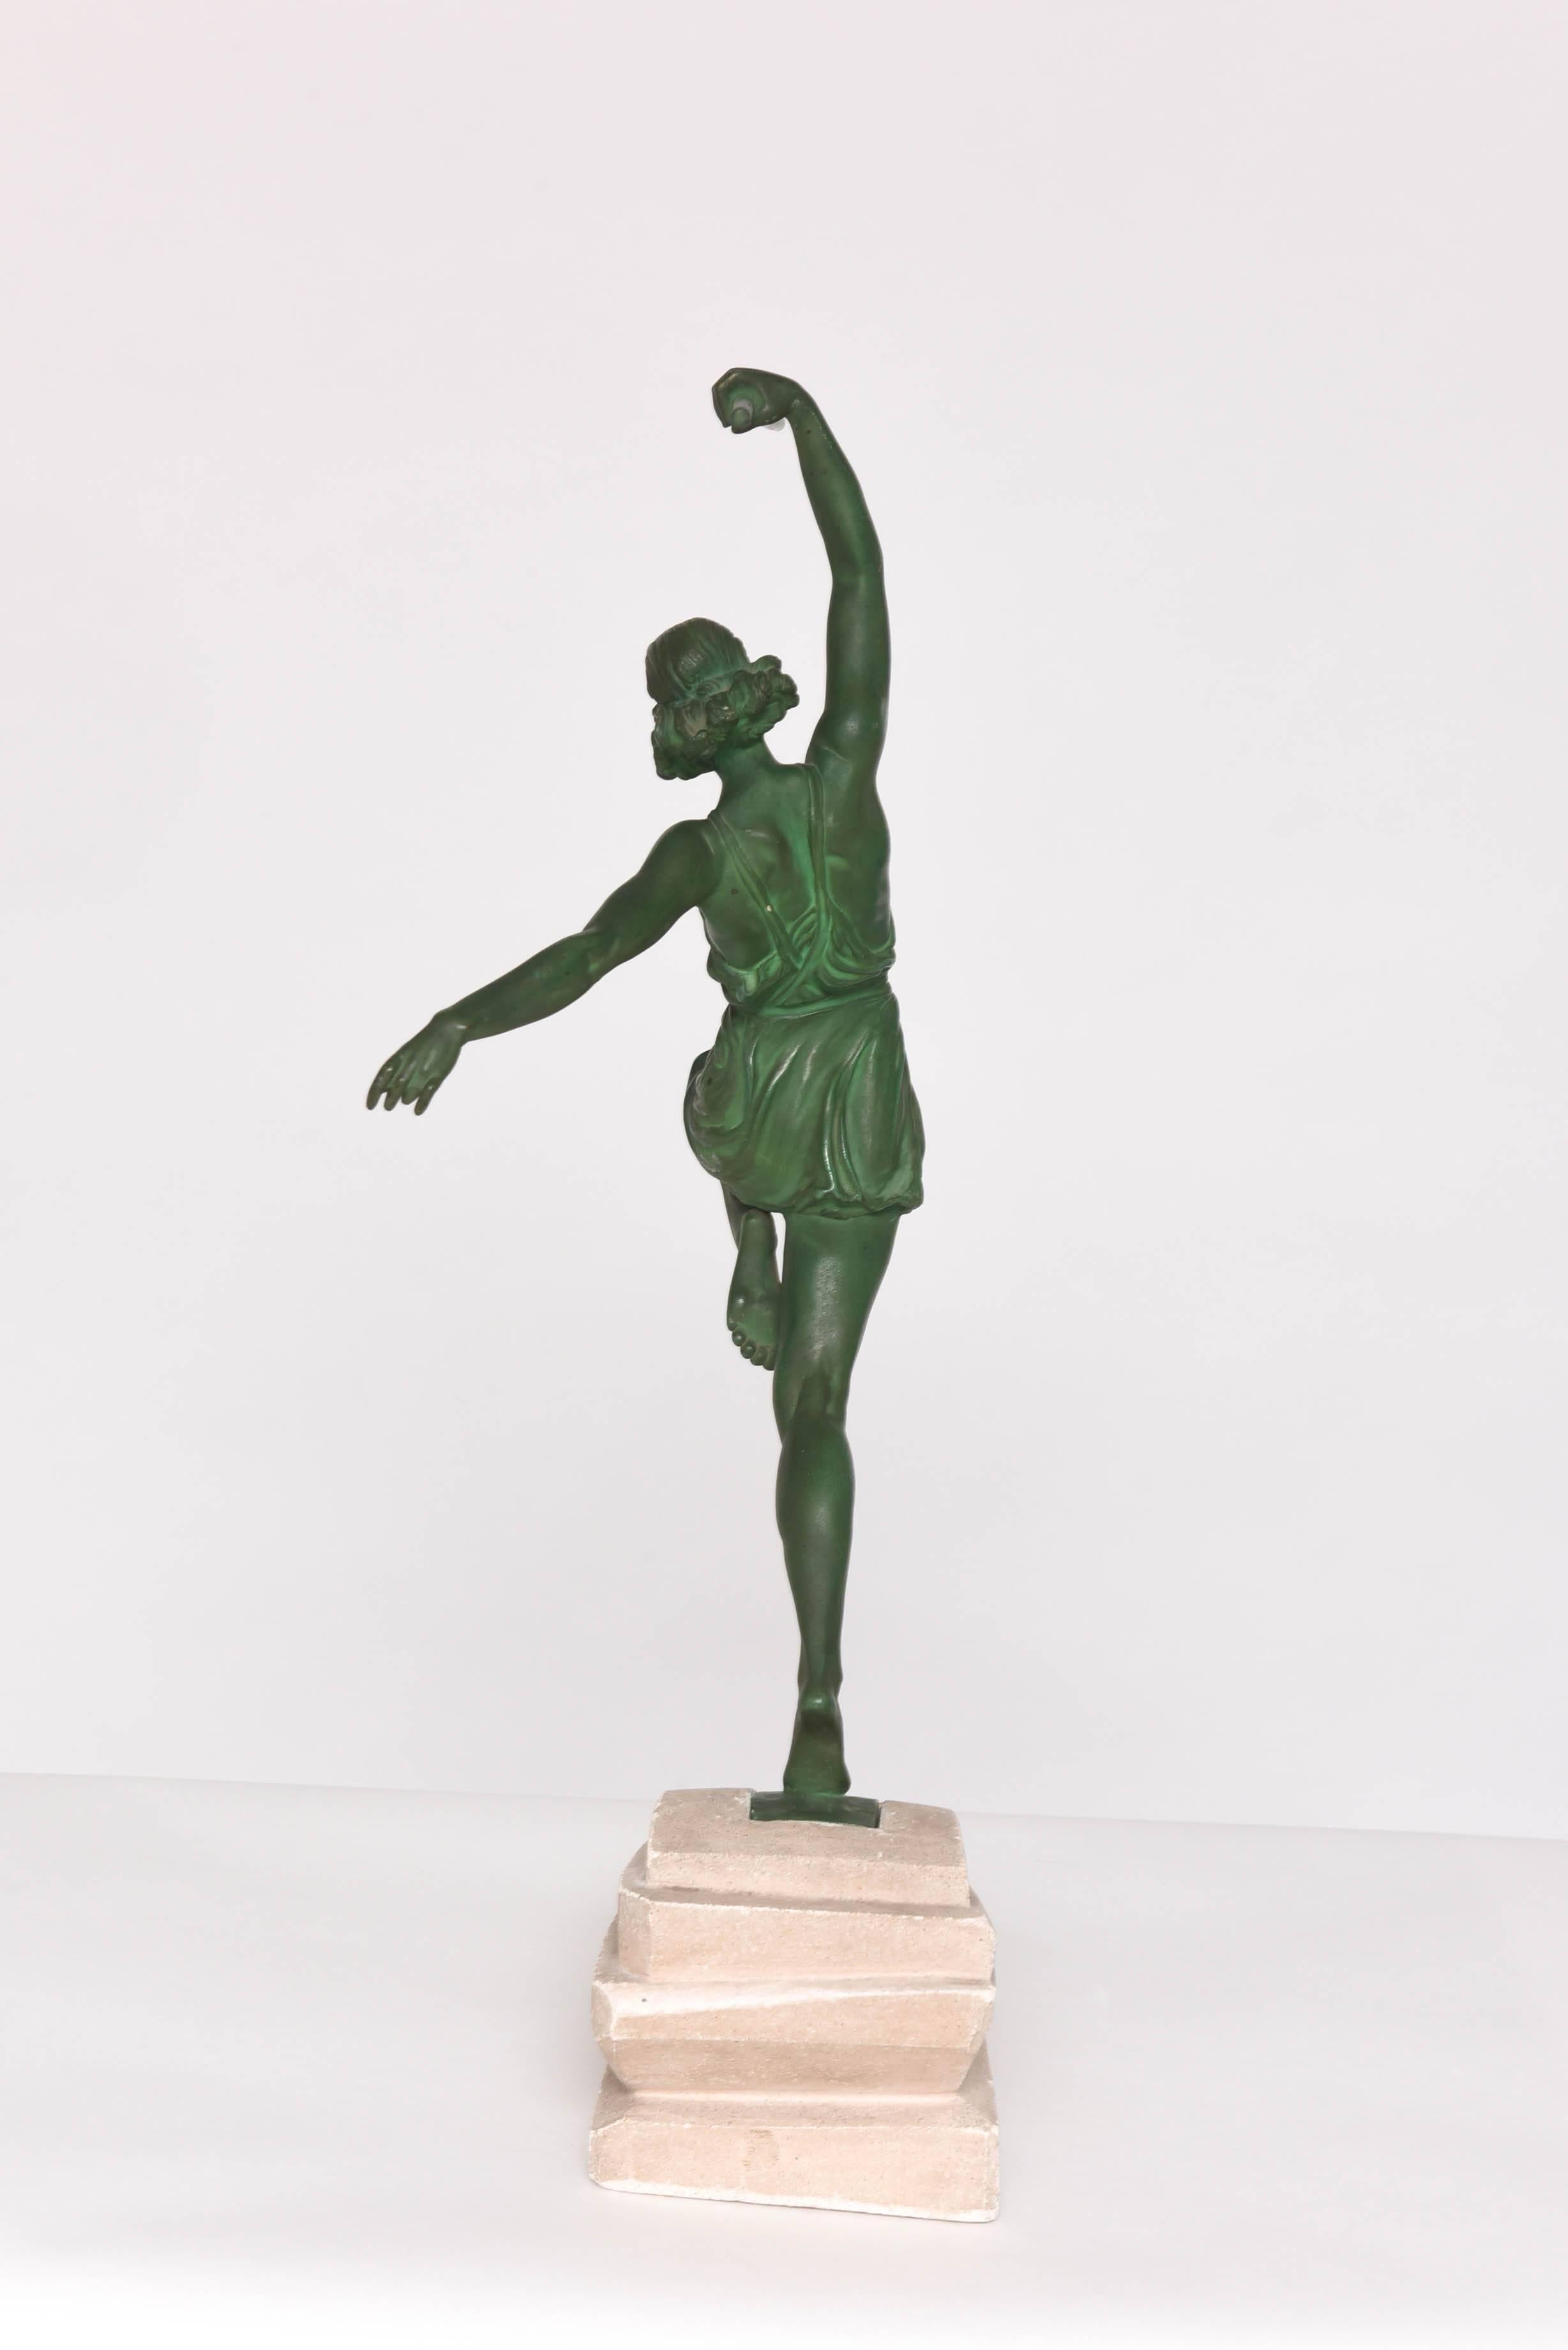 20th Century Art Deco Sculpture by Pierre Le Faguays a.k.a. Fayral, Amazonian Javelin Thrower